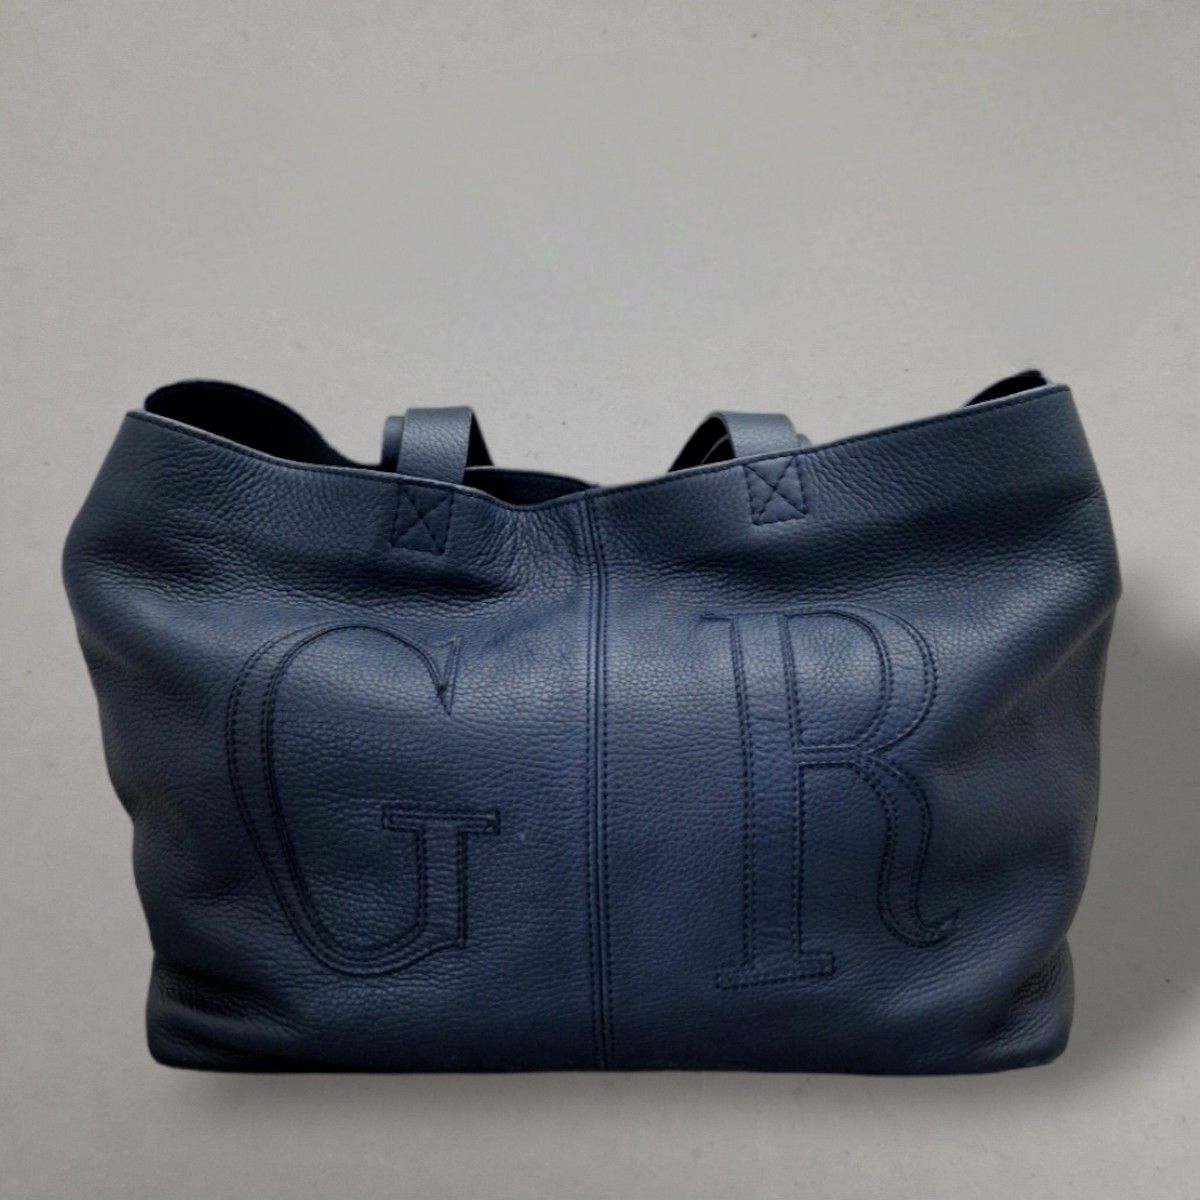 Null Georges RECH - FOLLOWING BAG 51 cm in blue grained leather, signed
TBE